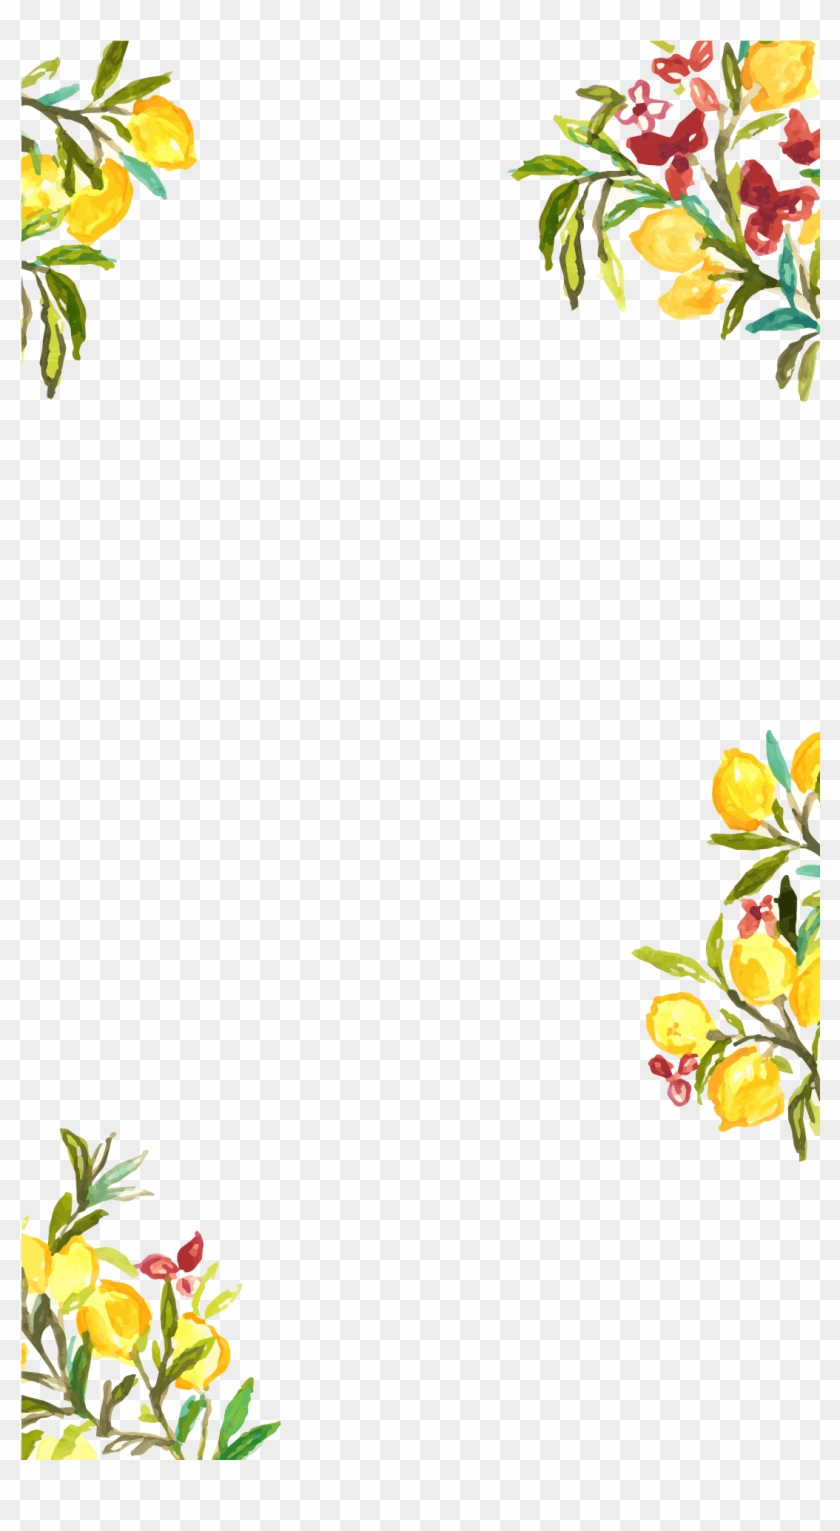 Wedding Snapchat Filters Weddingwire Clipart #4280971